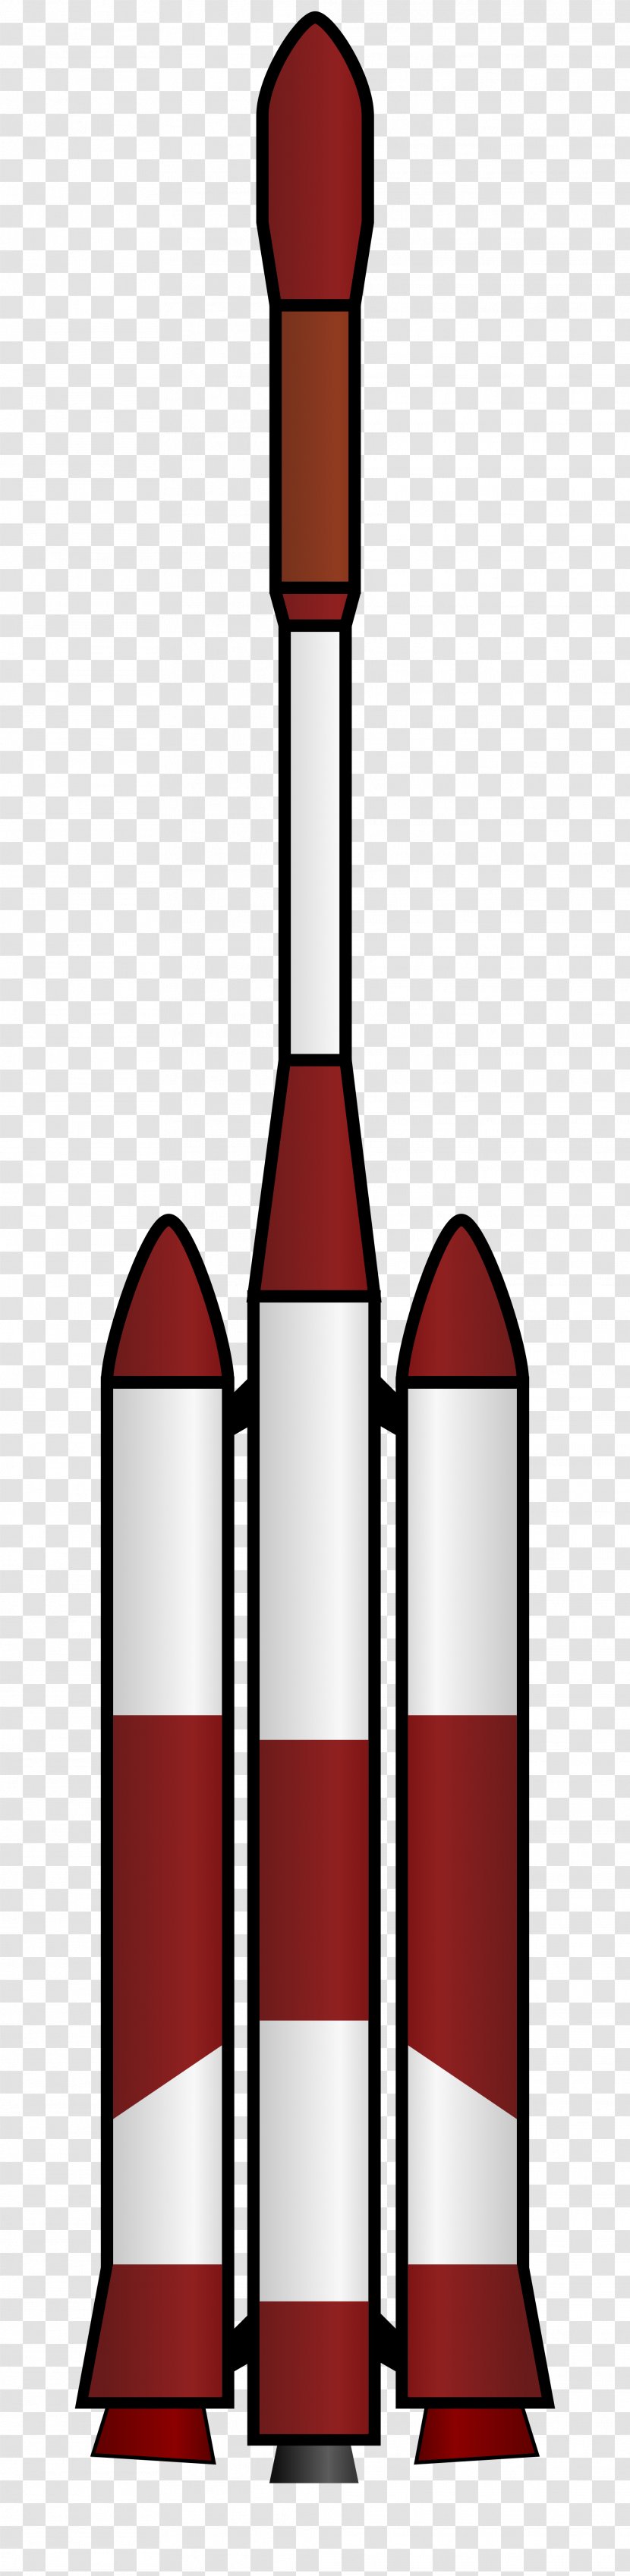 Augmented Satellite Launch Vehicle Rocket Indian Space Research Organisation - Spacecraft - Rockets Transparent PNG